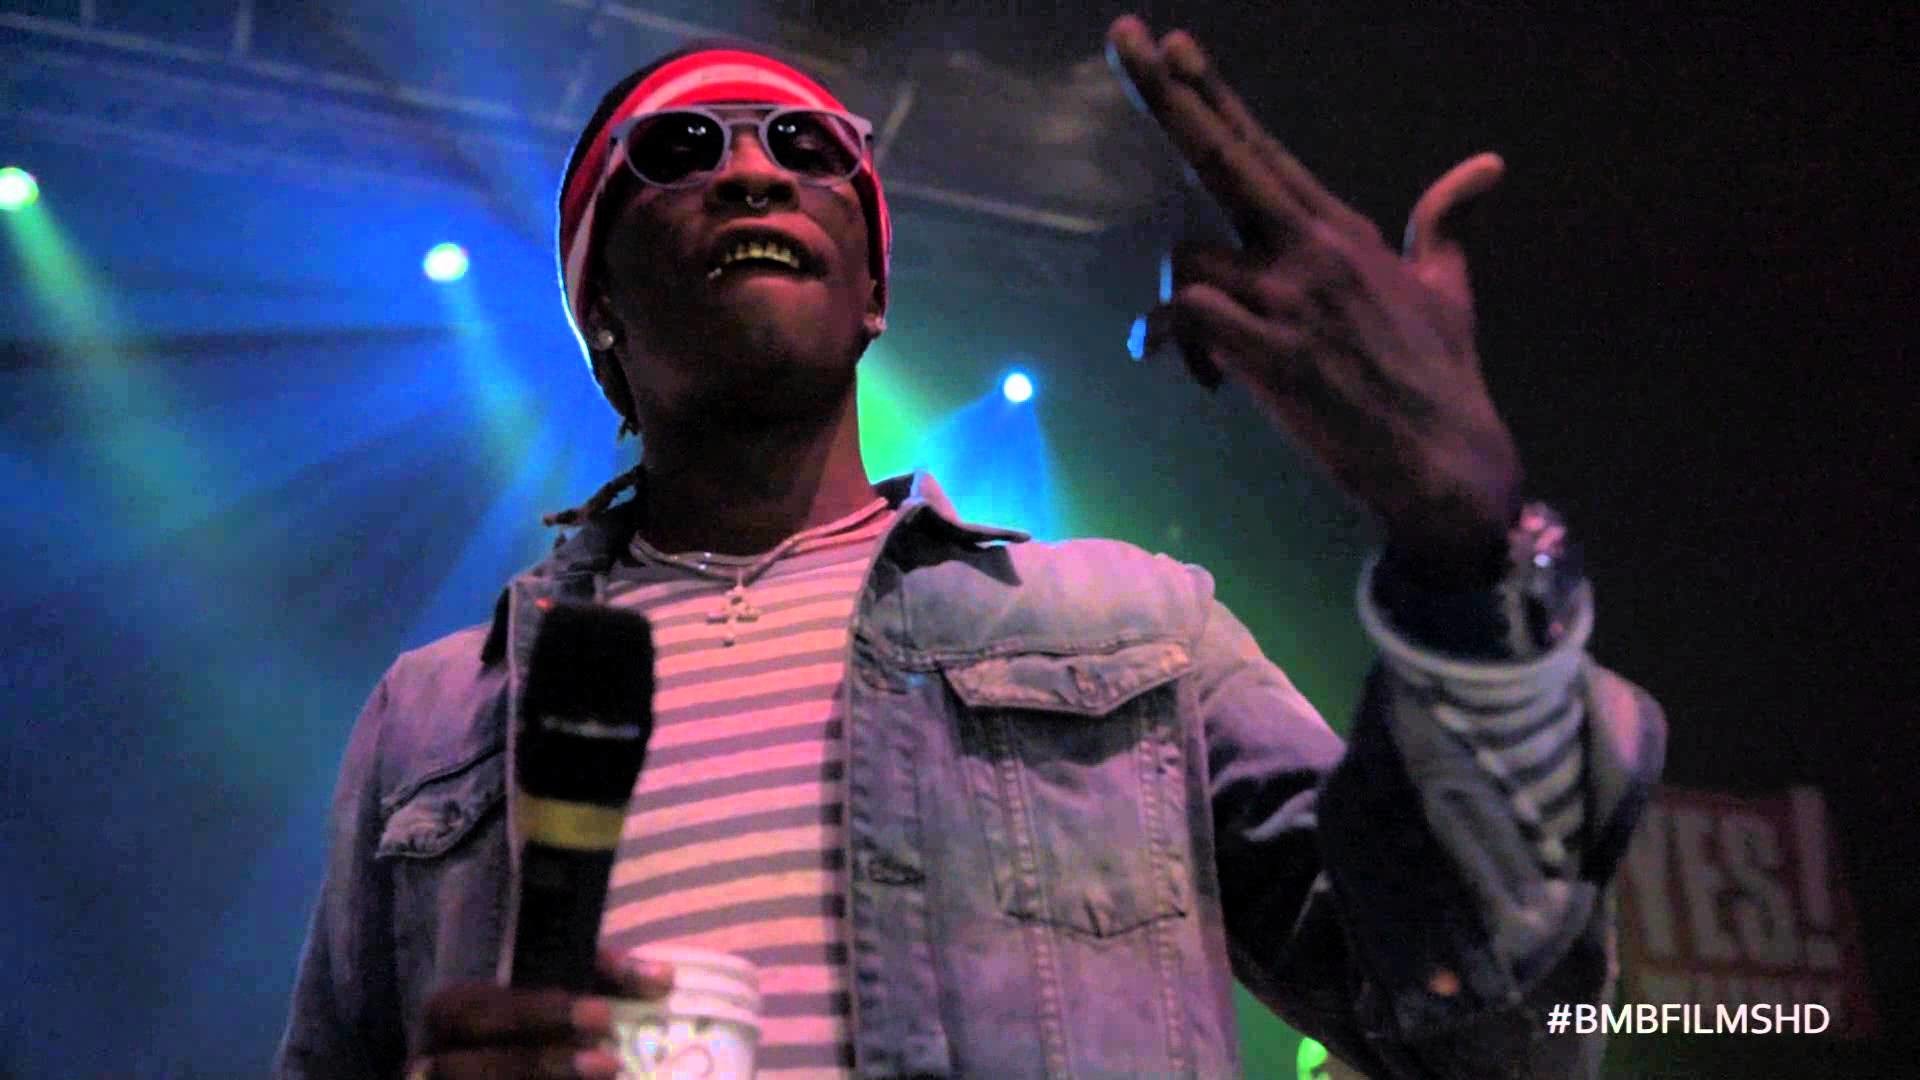 1920x1080 YOUNG THUG PREVIEW VIDEO 1080p 60fs #BMBFILMSHD